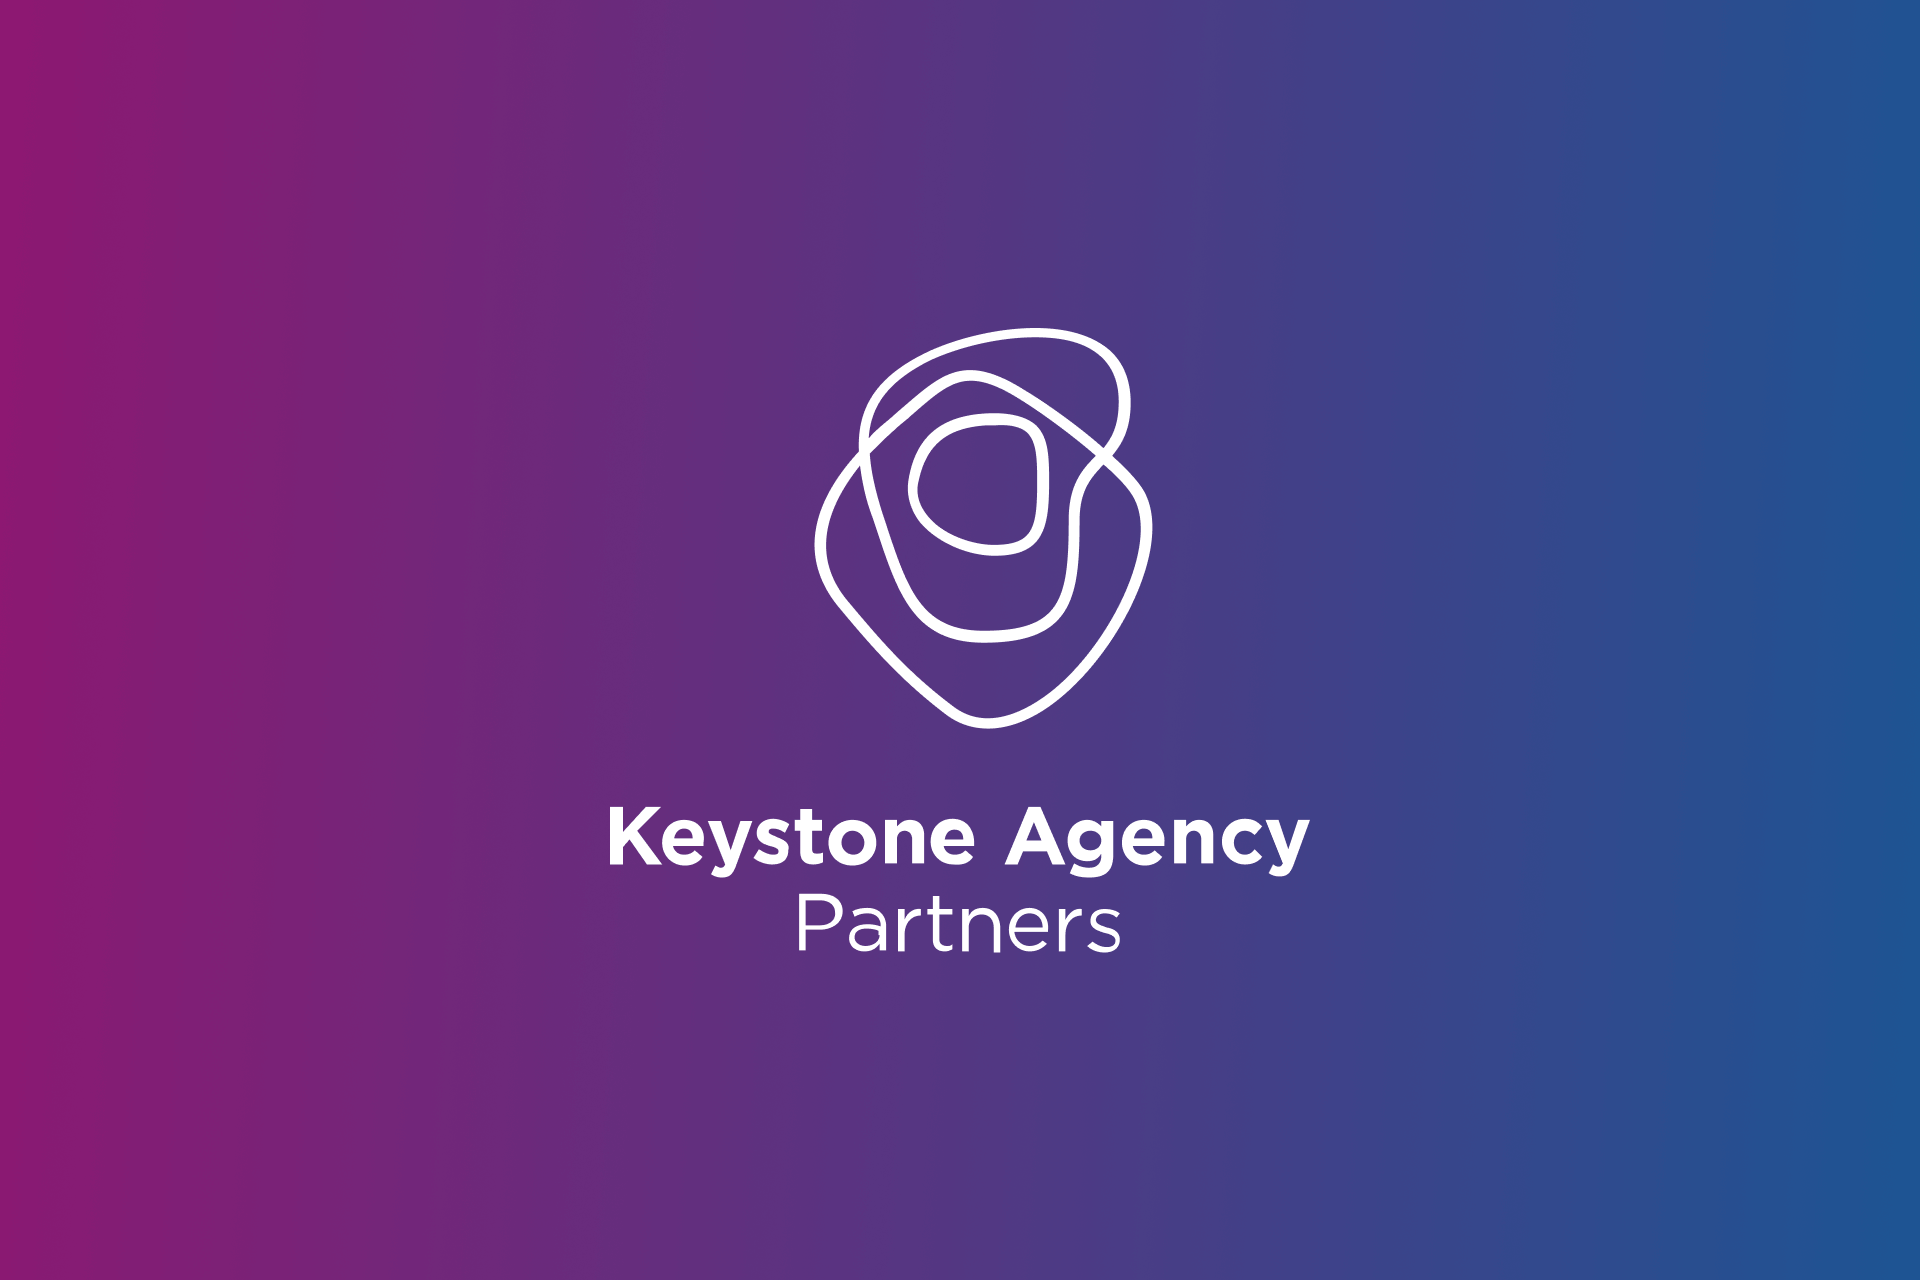 Keystone Agency Investors Forms Midwest Risk Partners With Acquisition of Four St. Louis Insurance Agencies